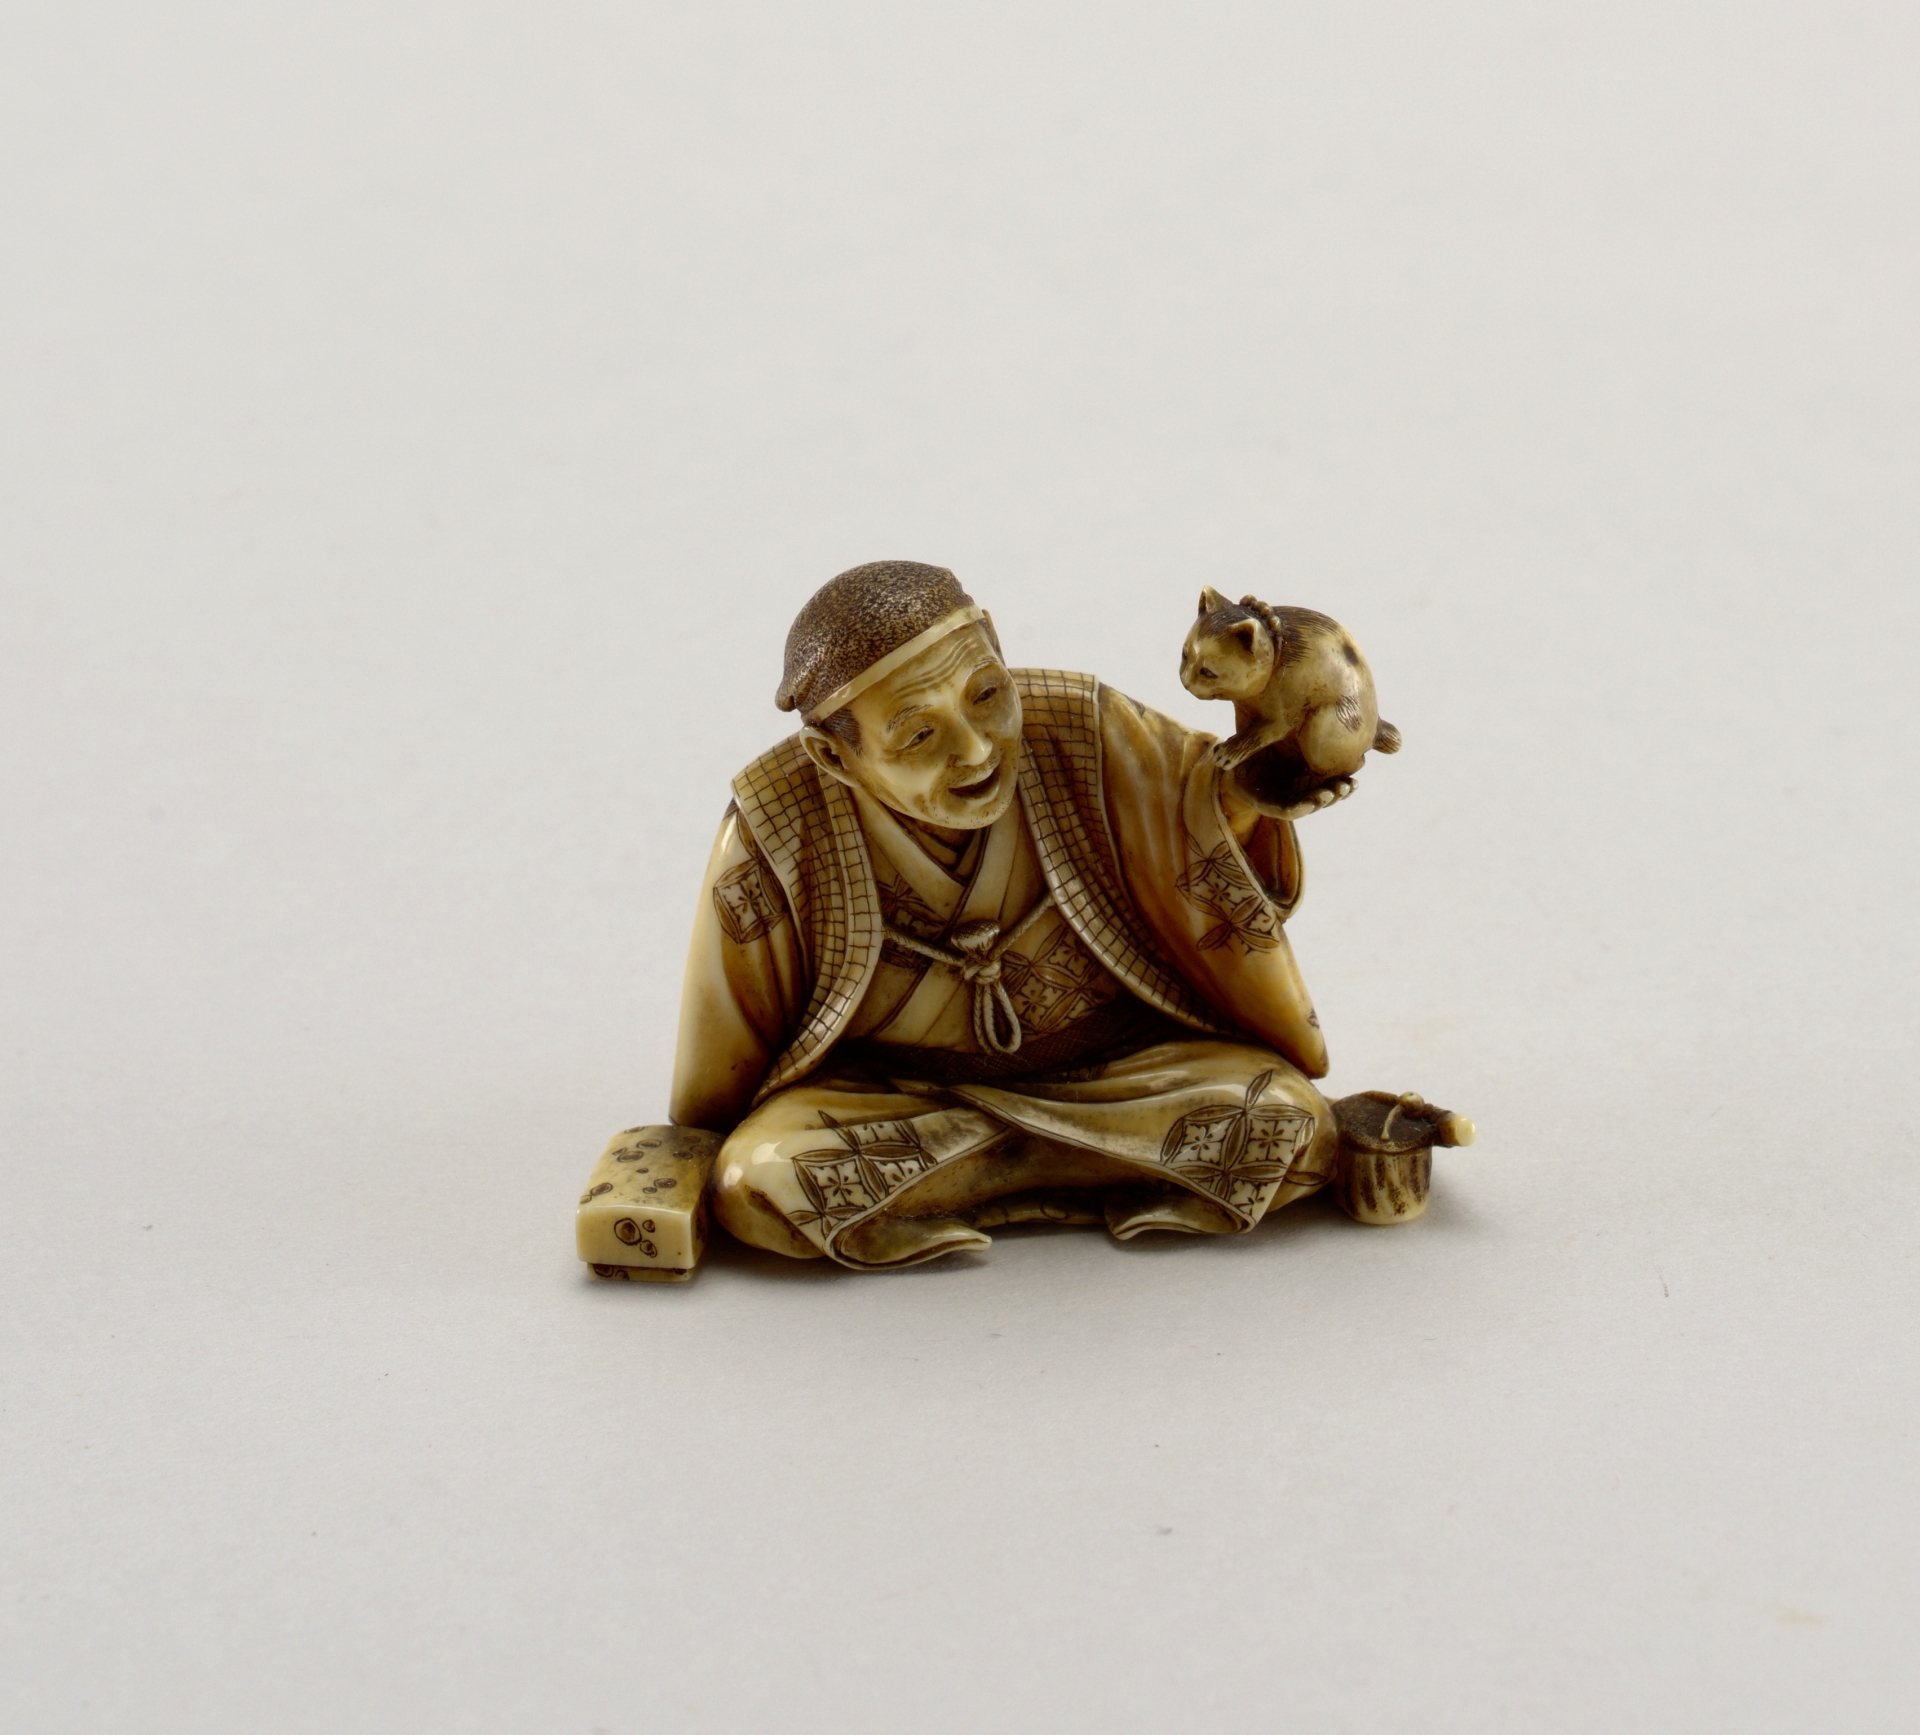 Carved ivory figurine of a man holding a cat, Chinese, c. 1800-1900.jpg